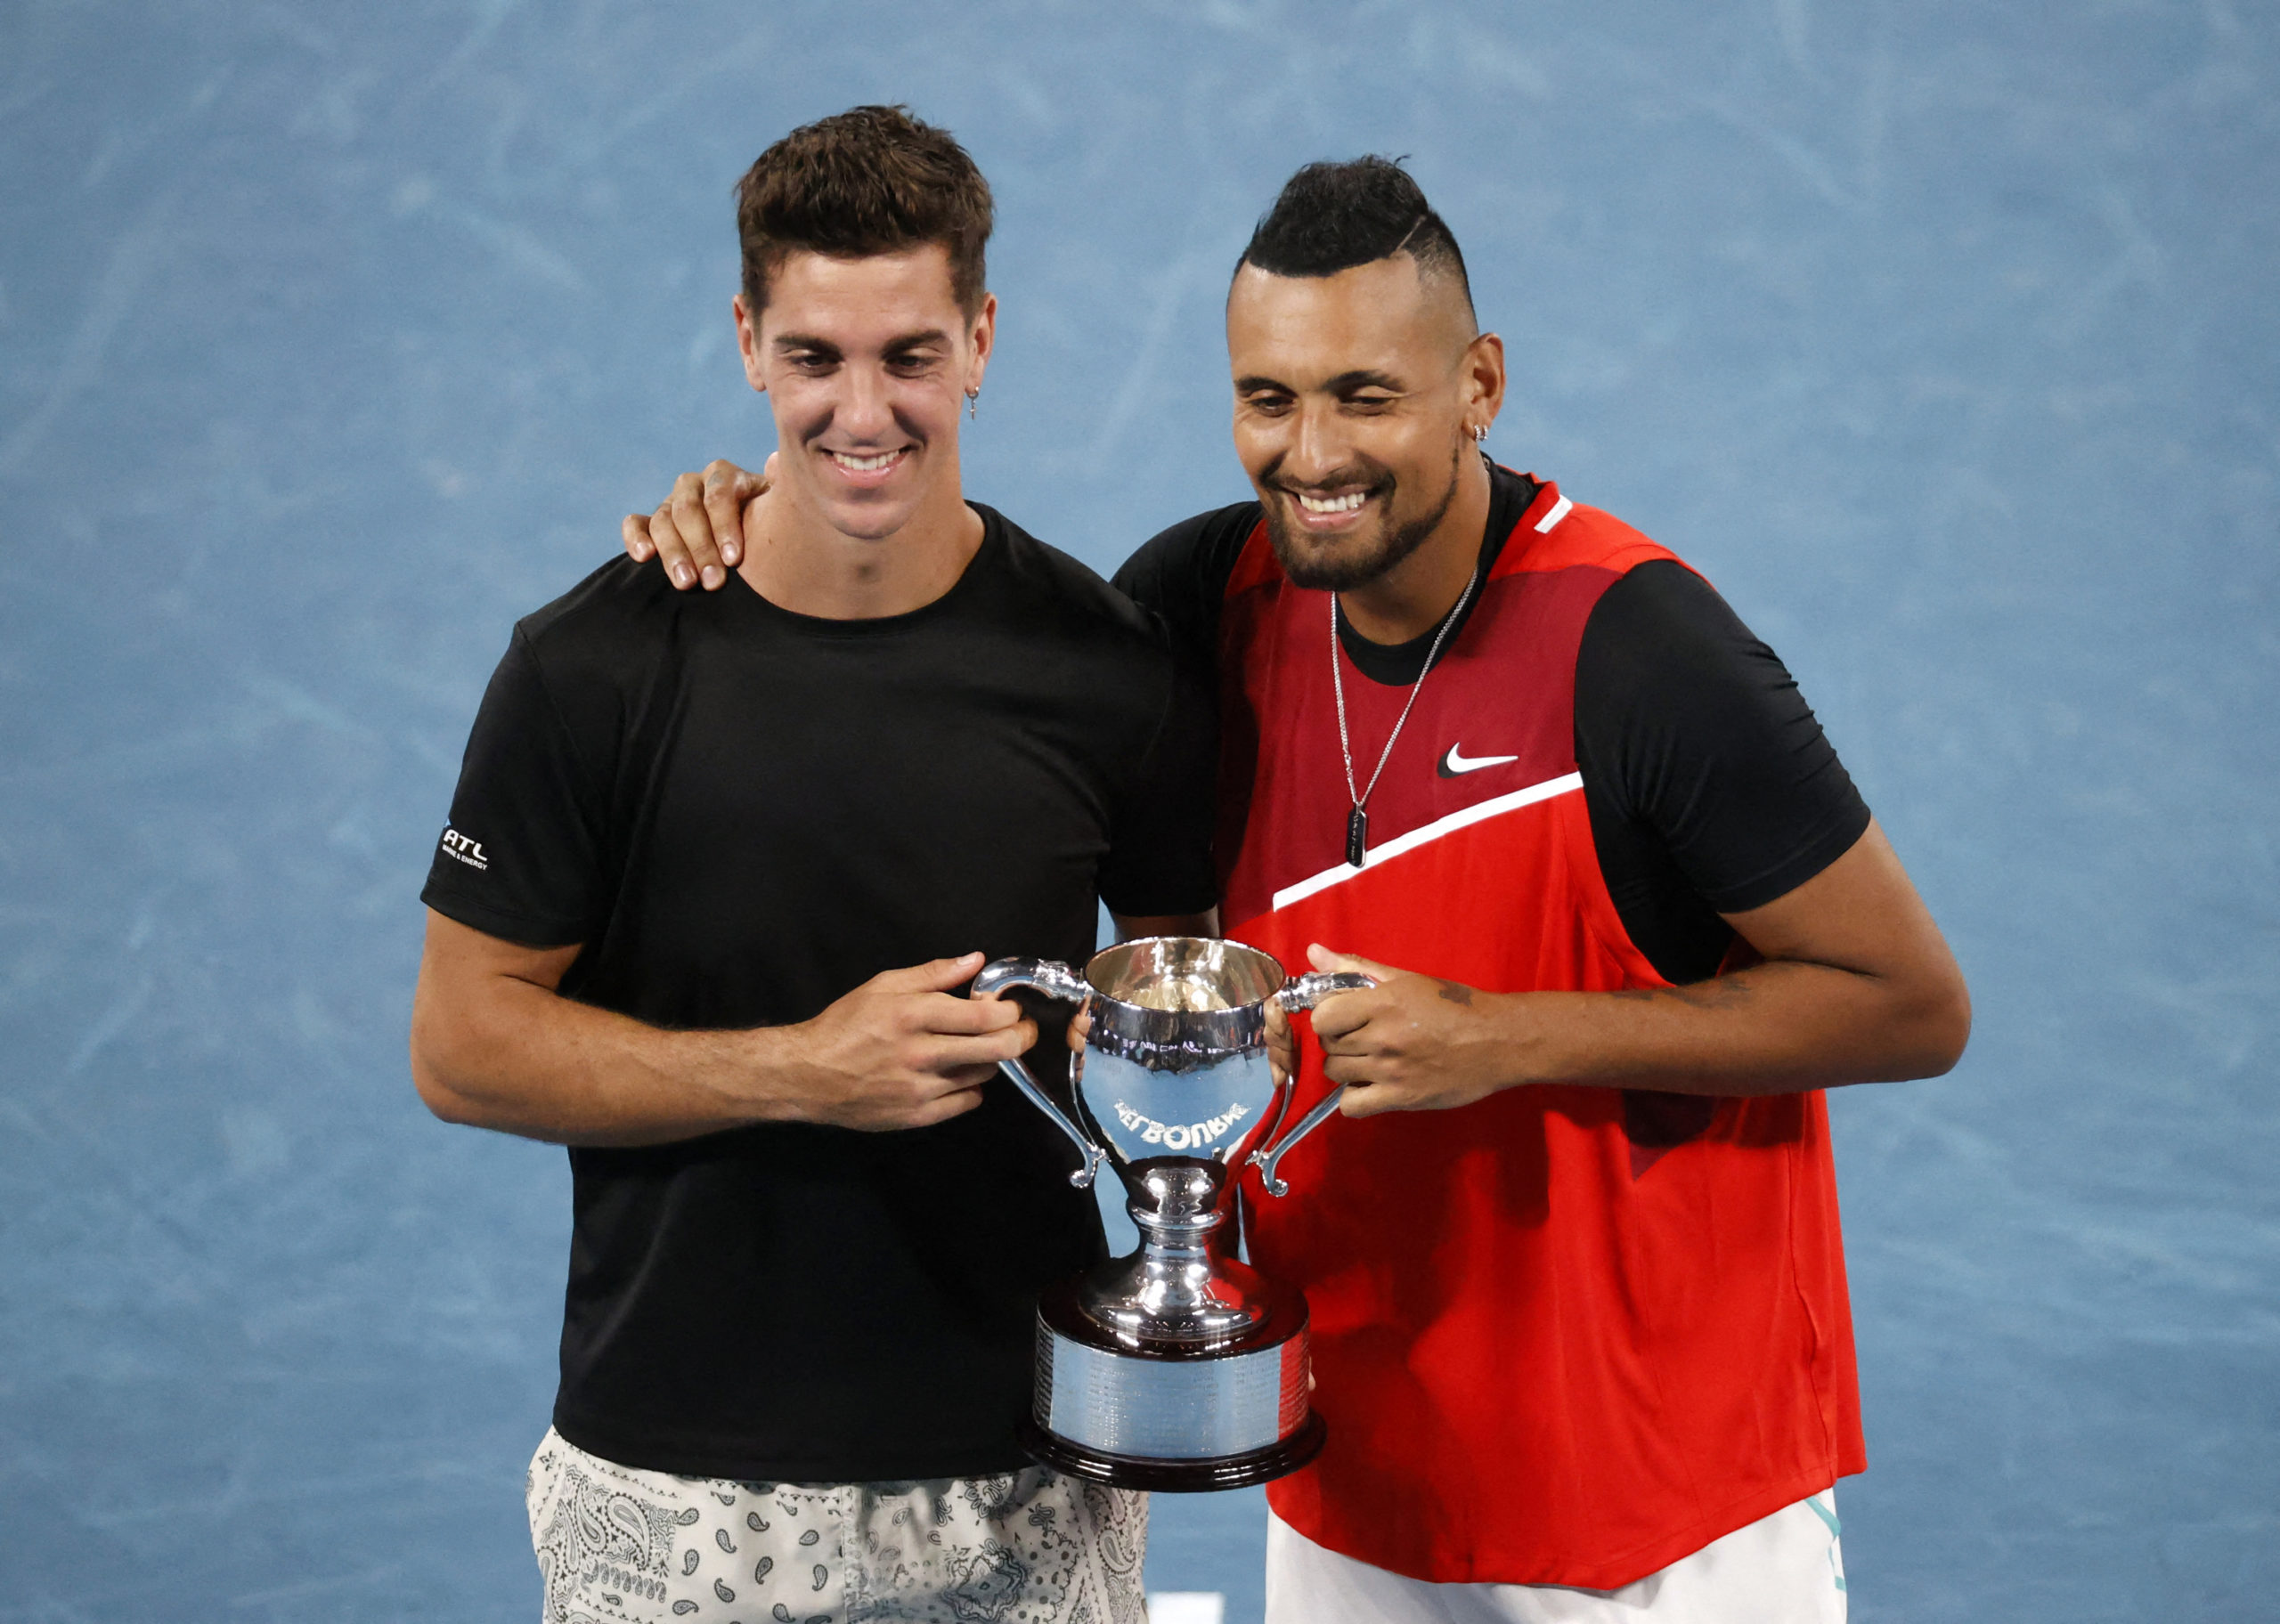 Tennis - Australian Open - Men's Doubles Final - Melbourne Park, Melbourne, Australia - January 29, 2022 Australia's Nick Kyrgios and Thanasi Kokkinakis celebrate winning the final against Australia's Matthew Ebden and Max Purcell with the trophy